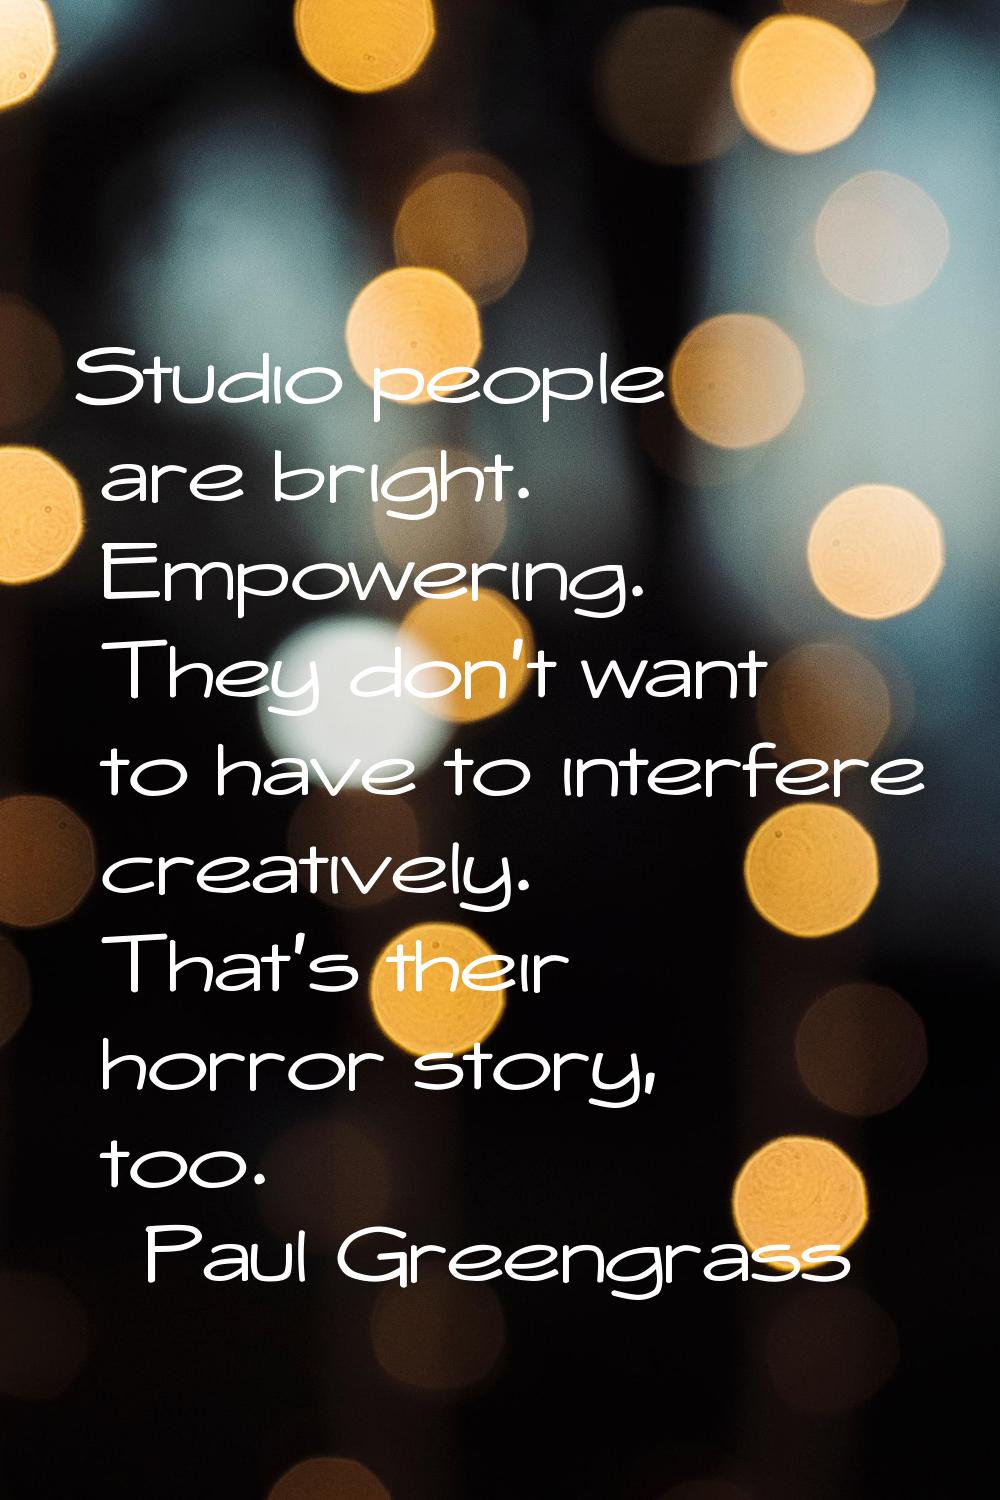 Studio people are bright. Empowering. They don't want to have to interfere creatively. That's their